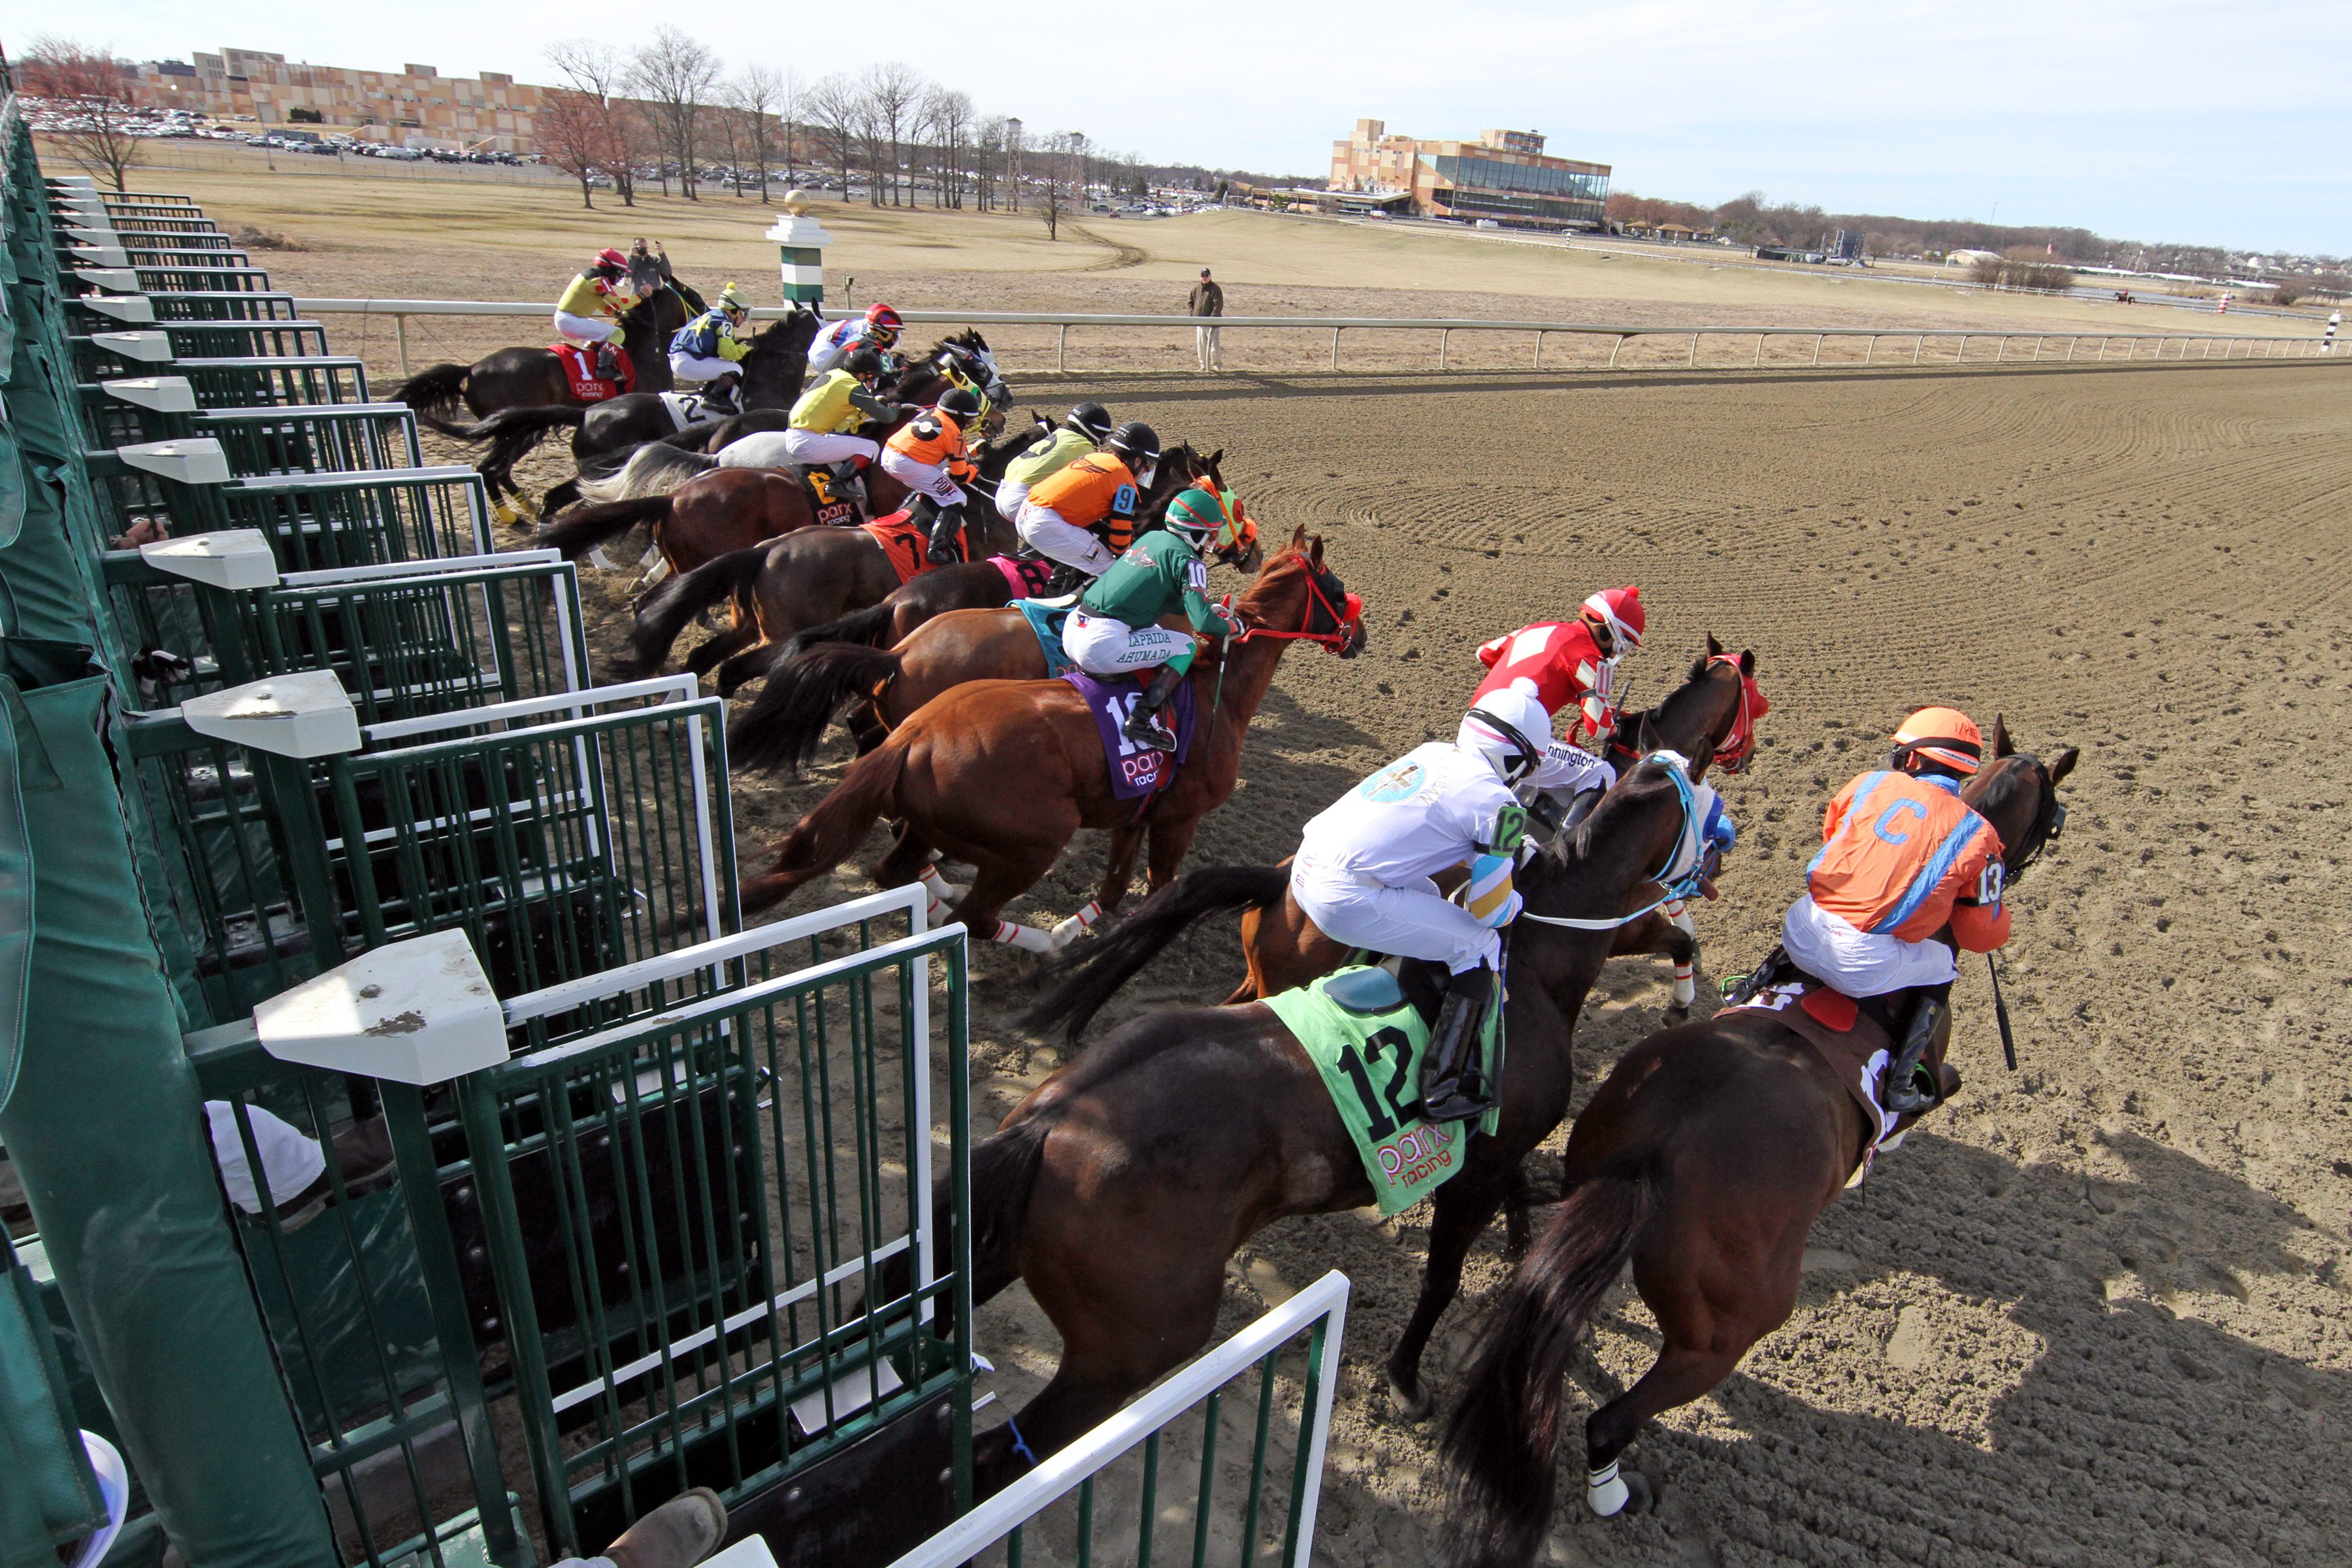 The start of Race 4 at Parx on March 8, 2022. Photo By: Chad B. Harmon